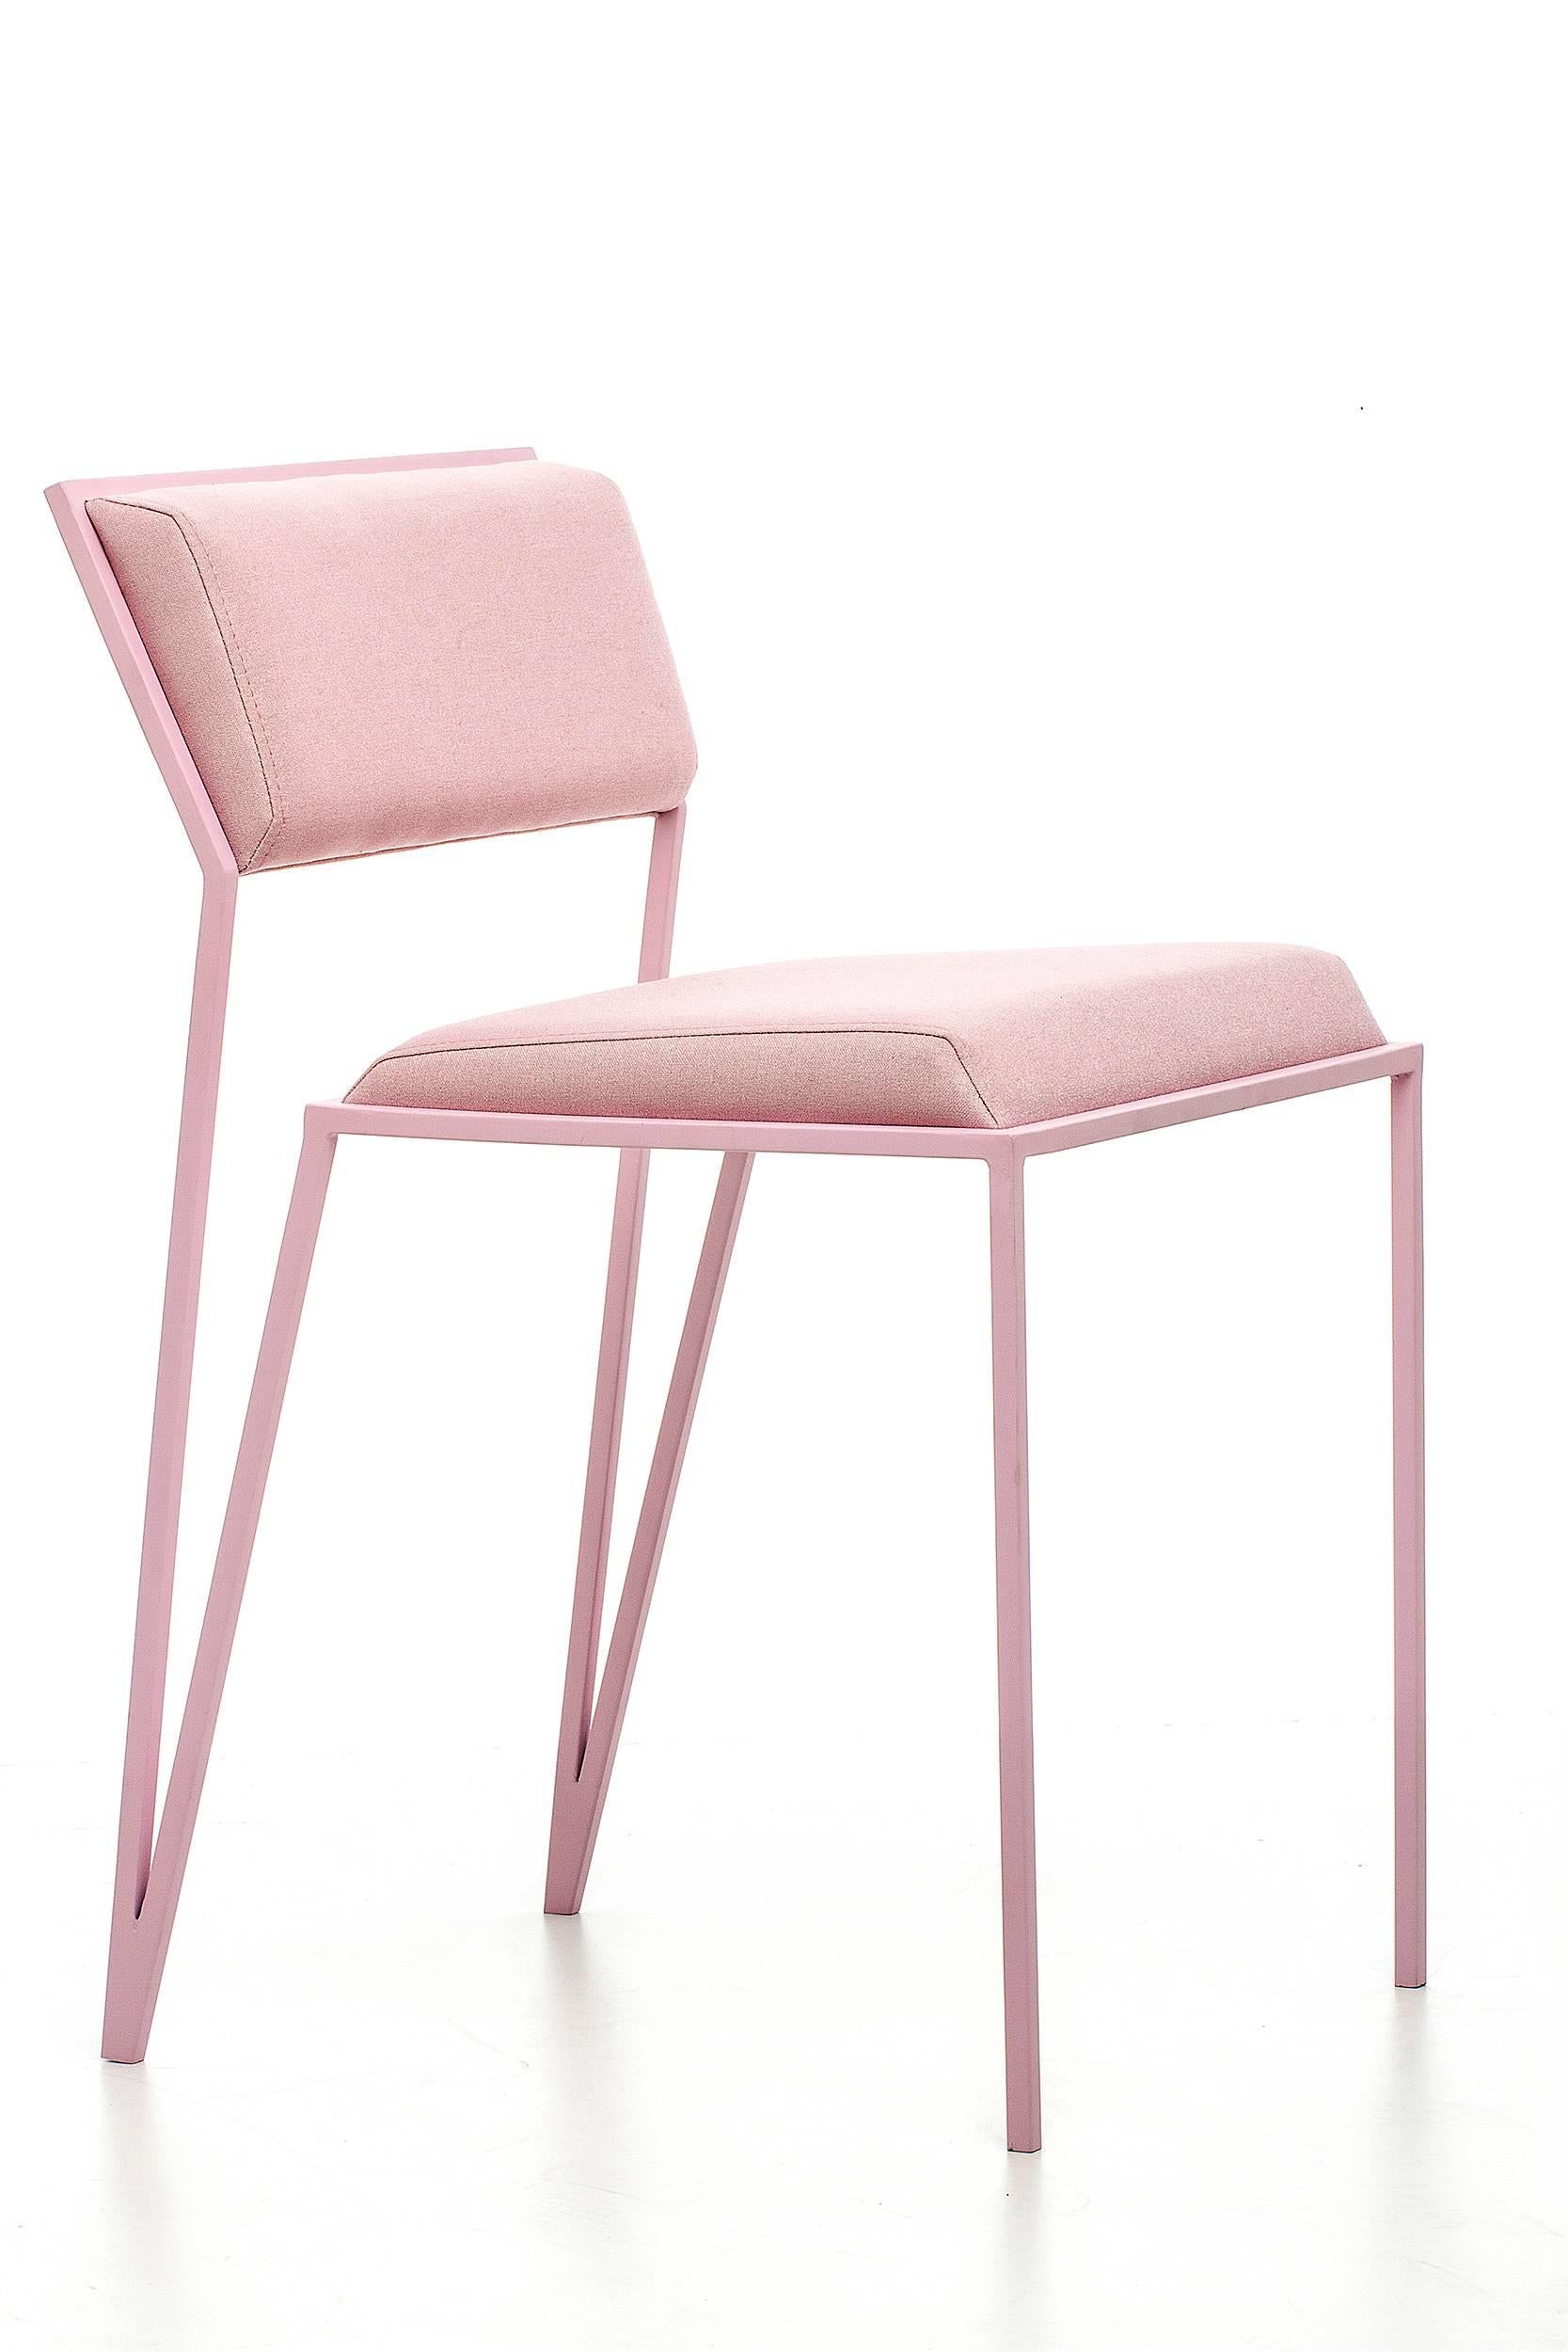 Velvet chair was designed from clean and pure lines with the elimination of any kind of excesses so that your greater identity were the colors, in a range of 09 options chosen by the user. By its minimalist appearance, the color of the structure